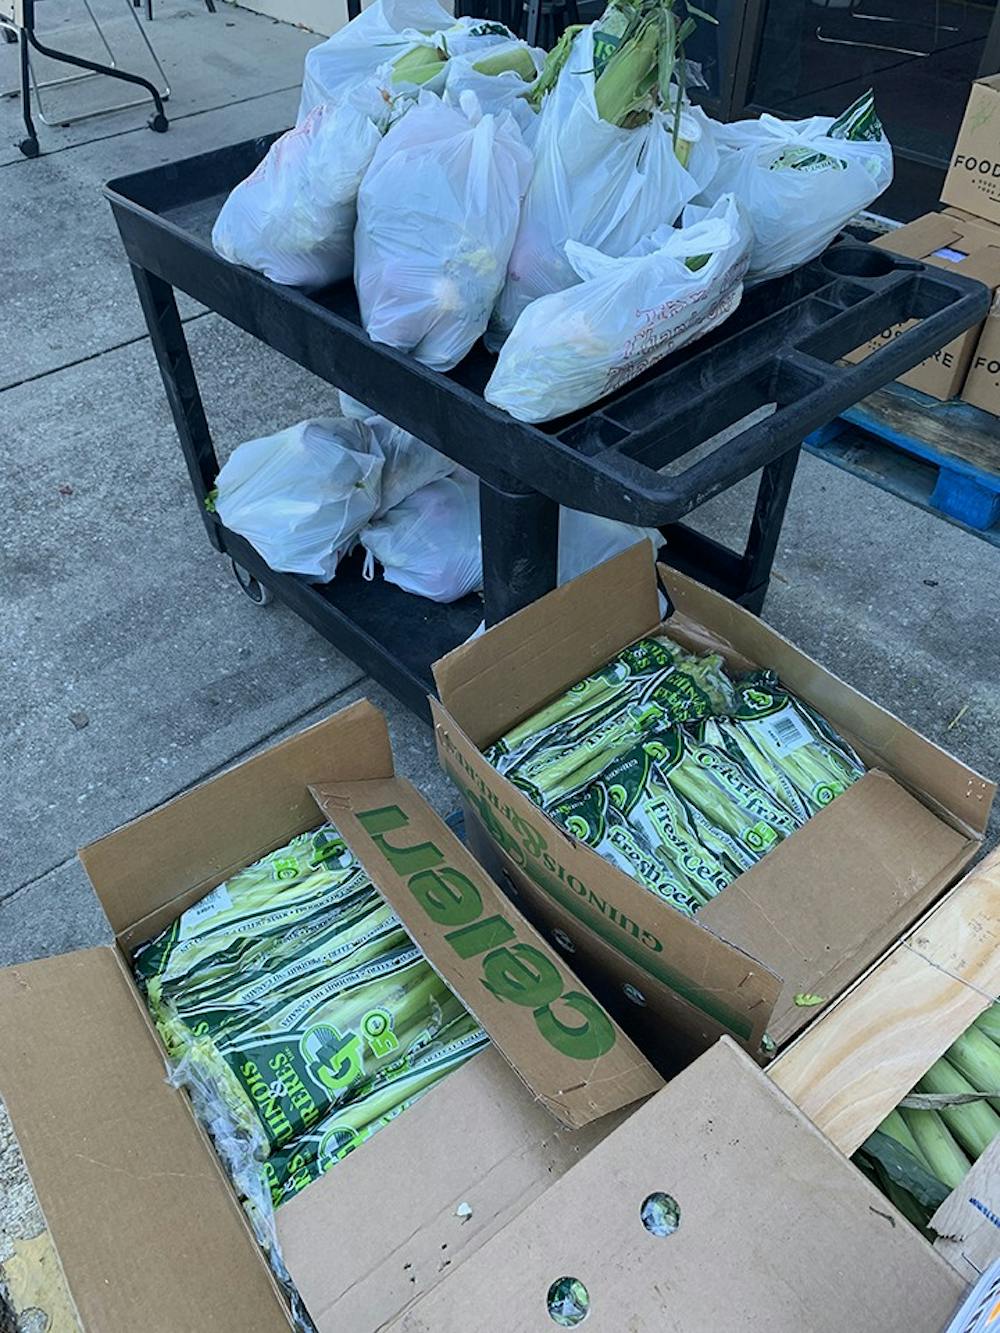 Boxes of celery and corn are brought in to be sold.